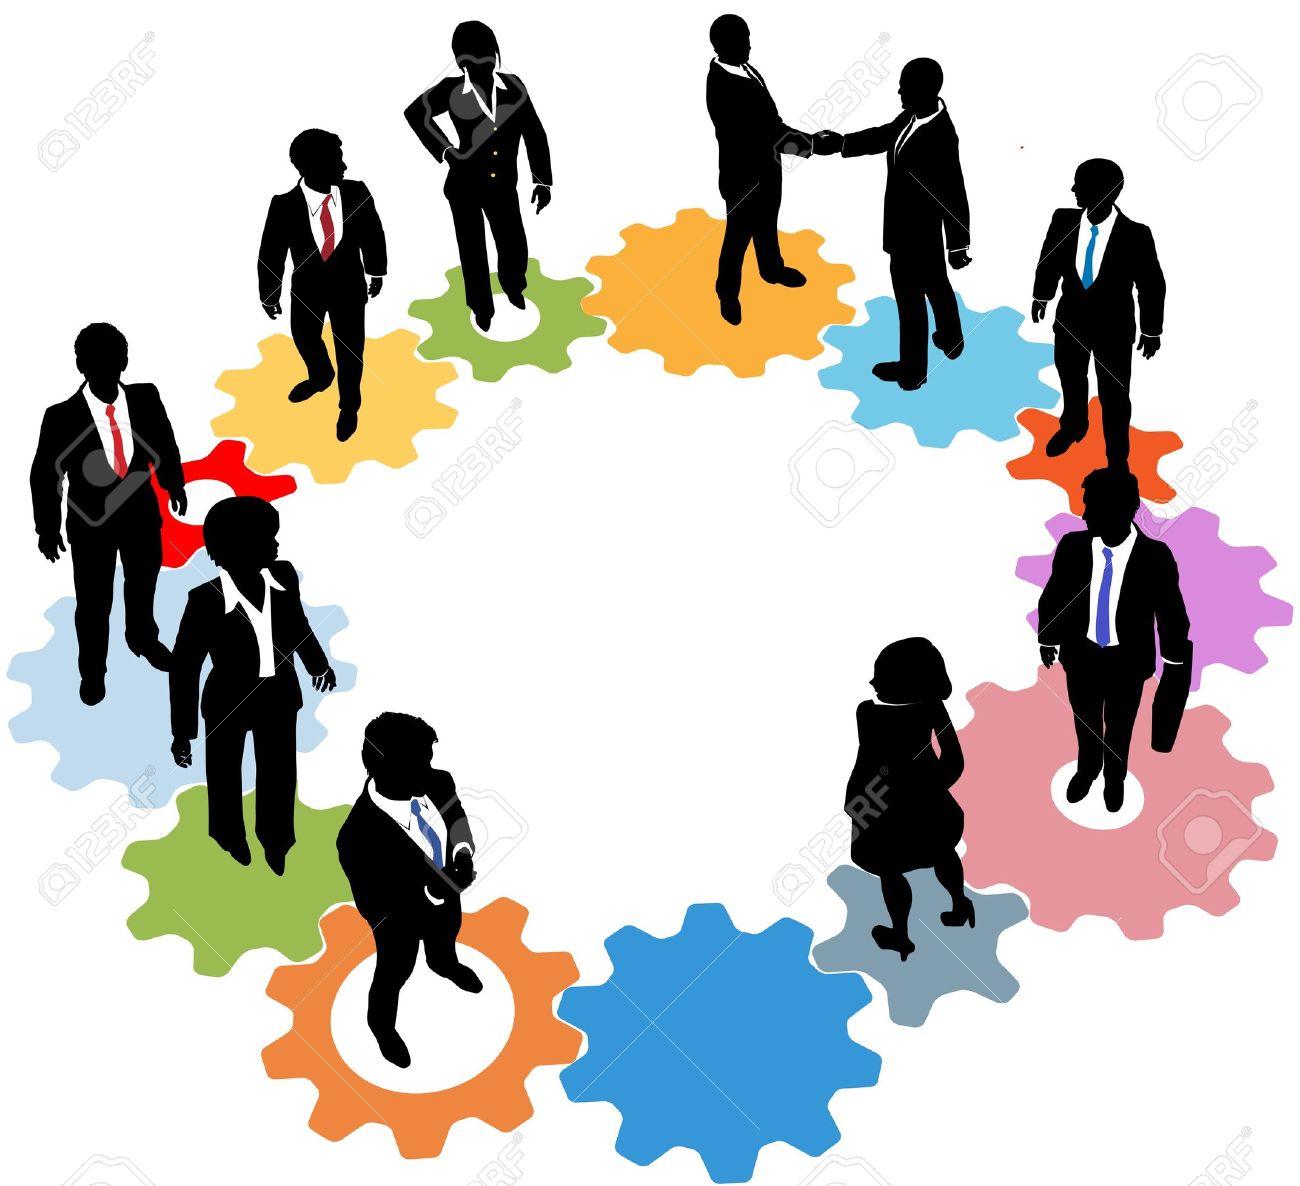 People free download best. Businessman clipart business collaboration